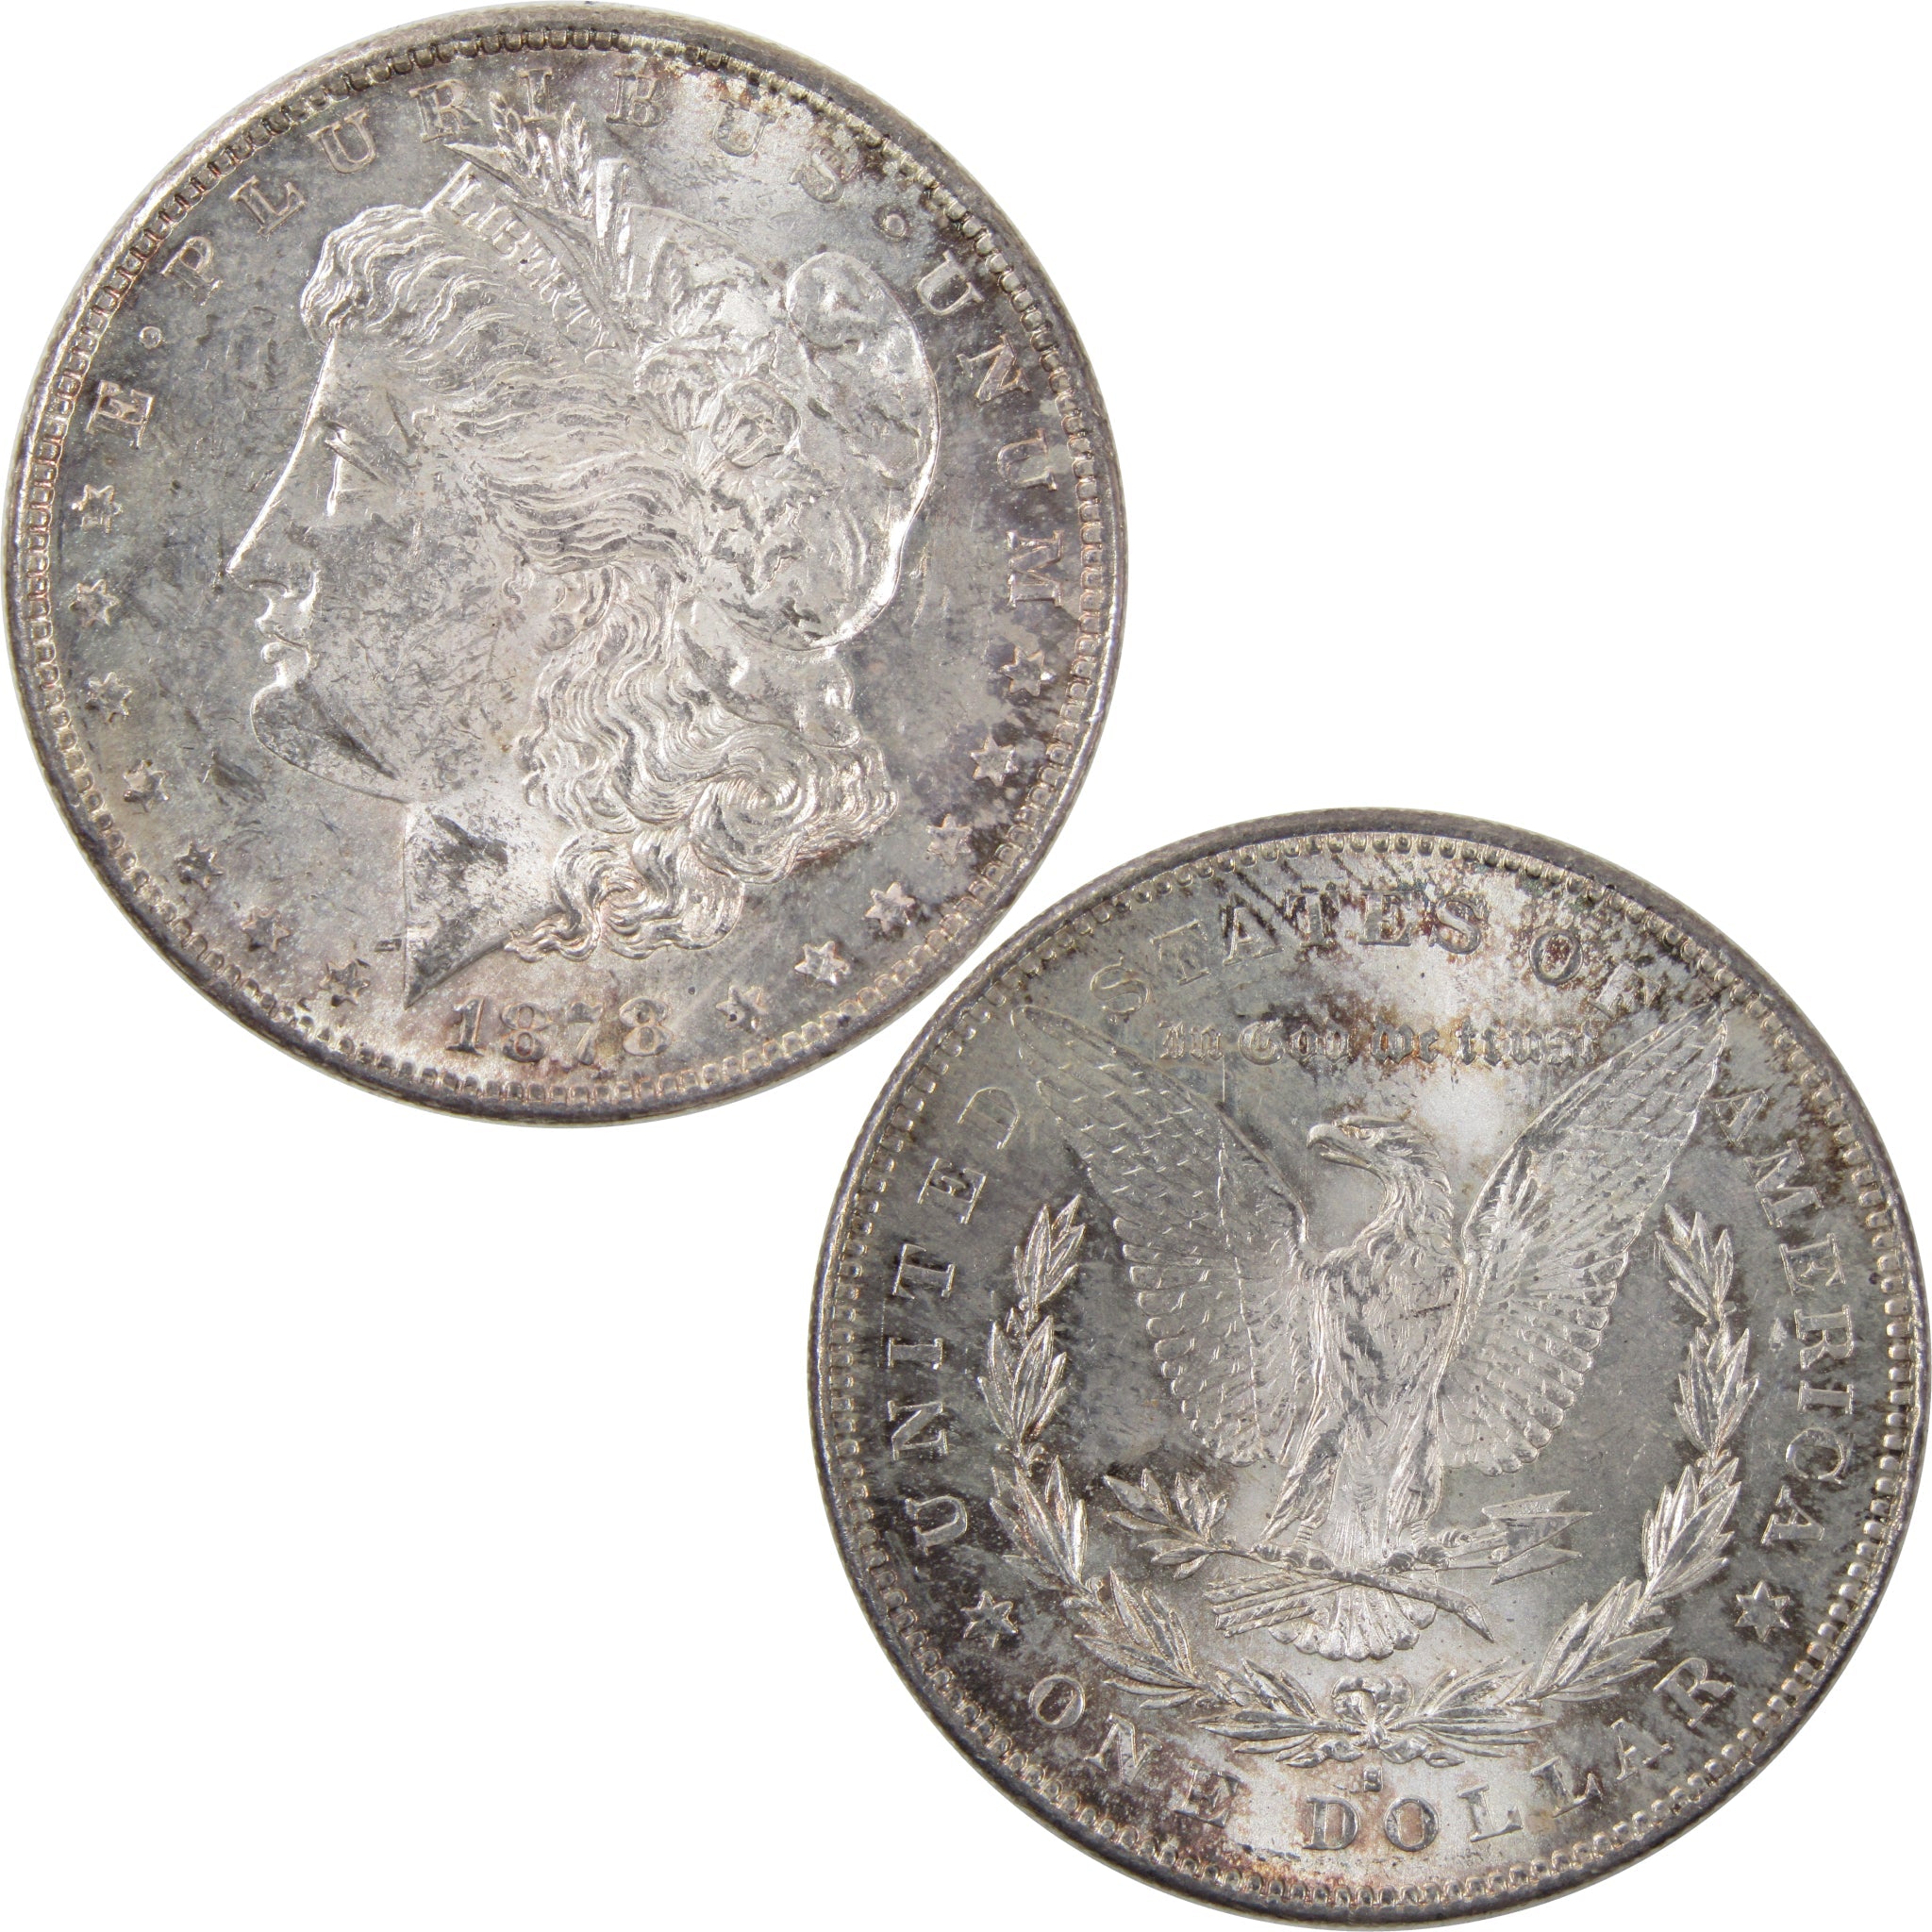 1878 S Morgan Dollar BU Uncirculated Mint State 90% Silver SKU:I2520 - Morgan coin - Morgan silver dollar - Morgan silver dollar for sale - Profile Coins &amp; Collectibles